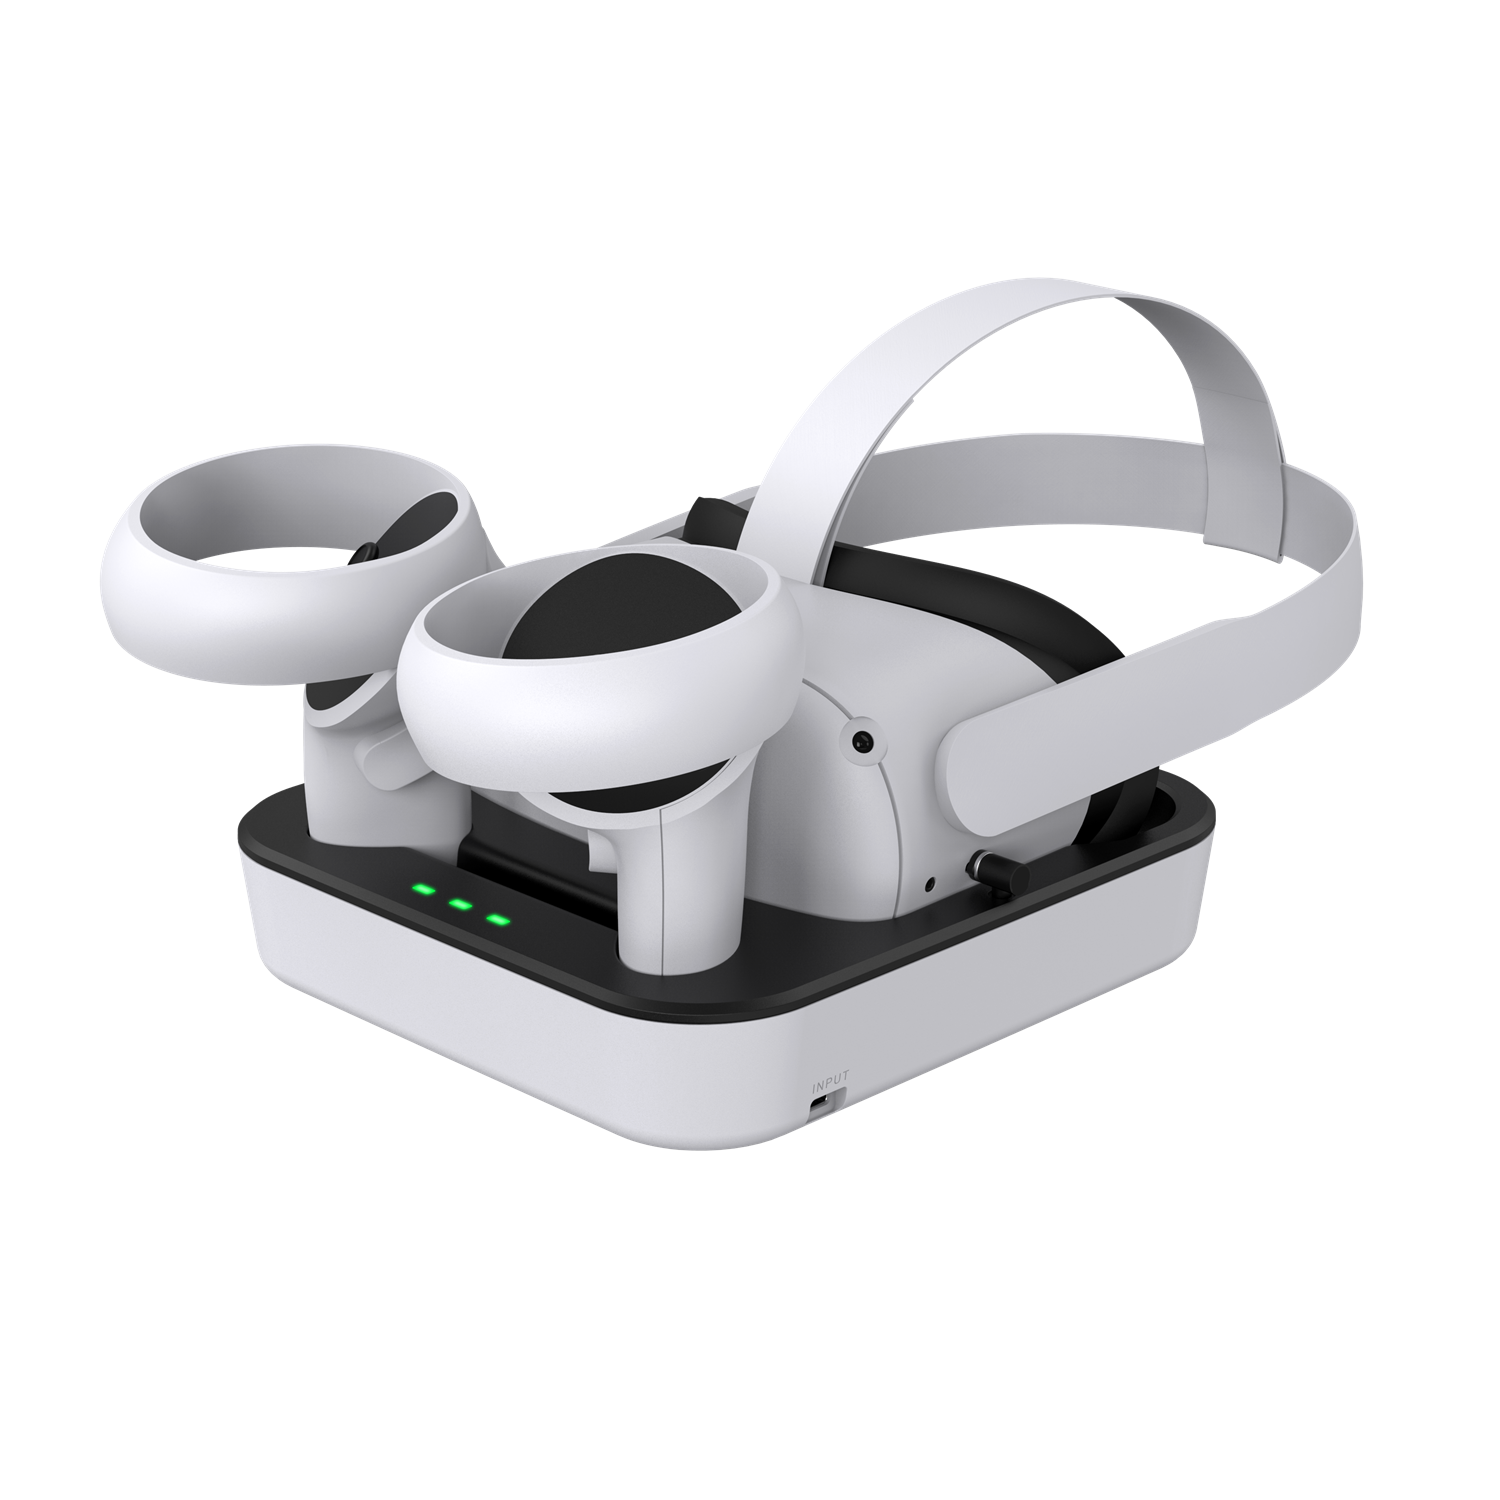 Oculus quest 2 VR headset and controller